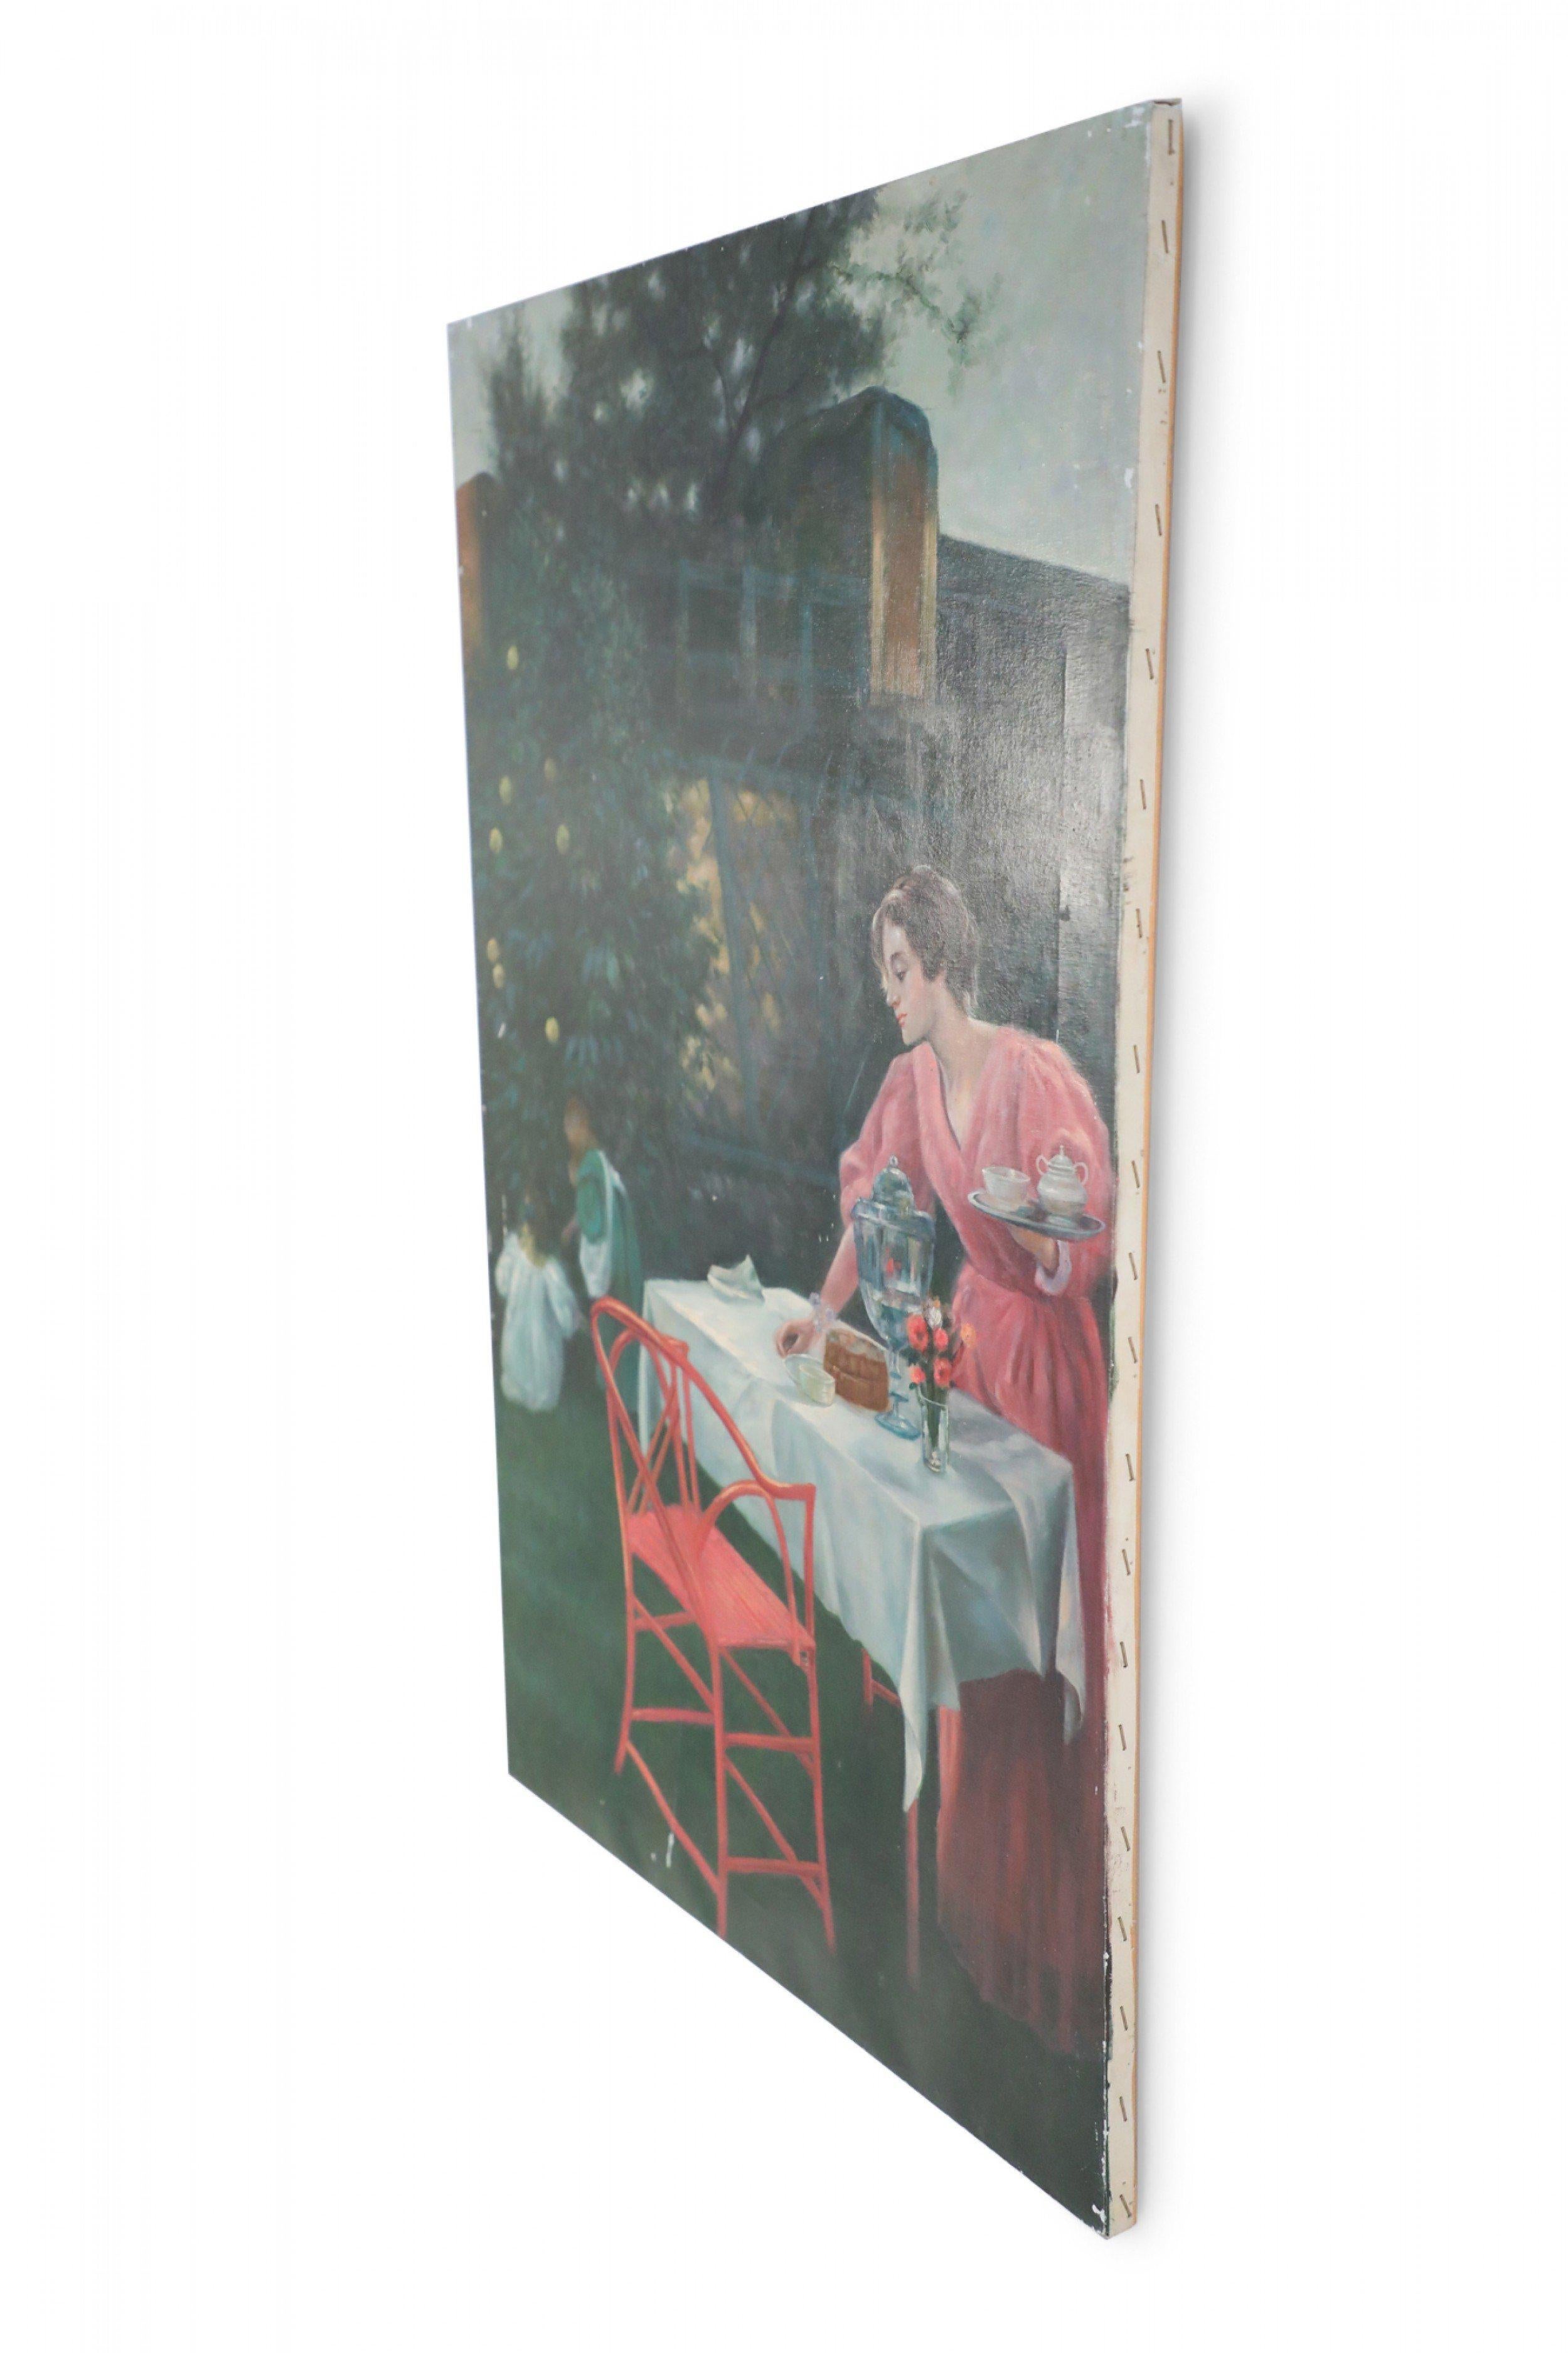 Vintage (20th Century) unframed canvas oil painting of a woman wearing a long pink dress setting a table for tea alongside a home, while two children play under a nearby apple tree.
 